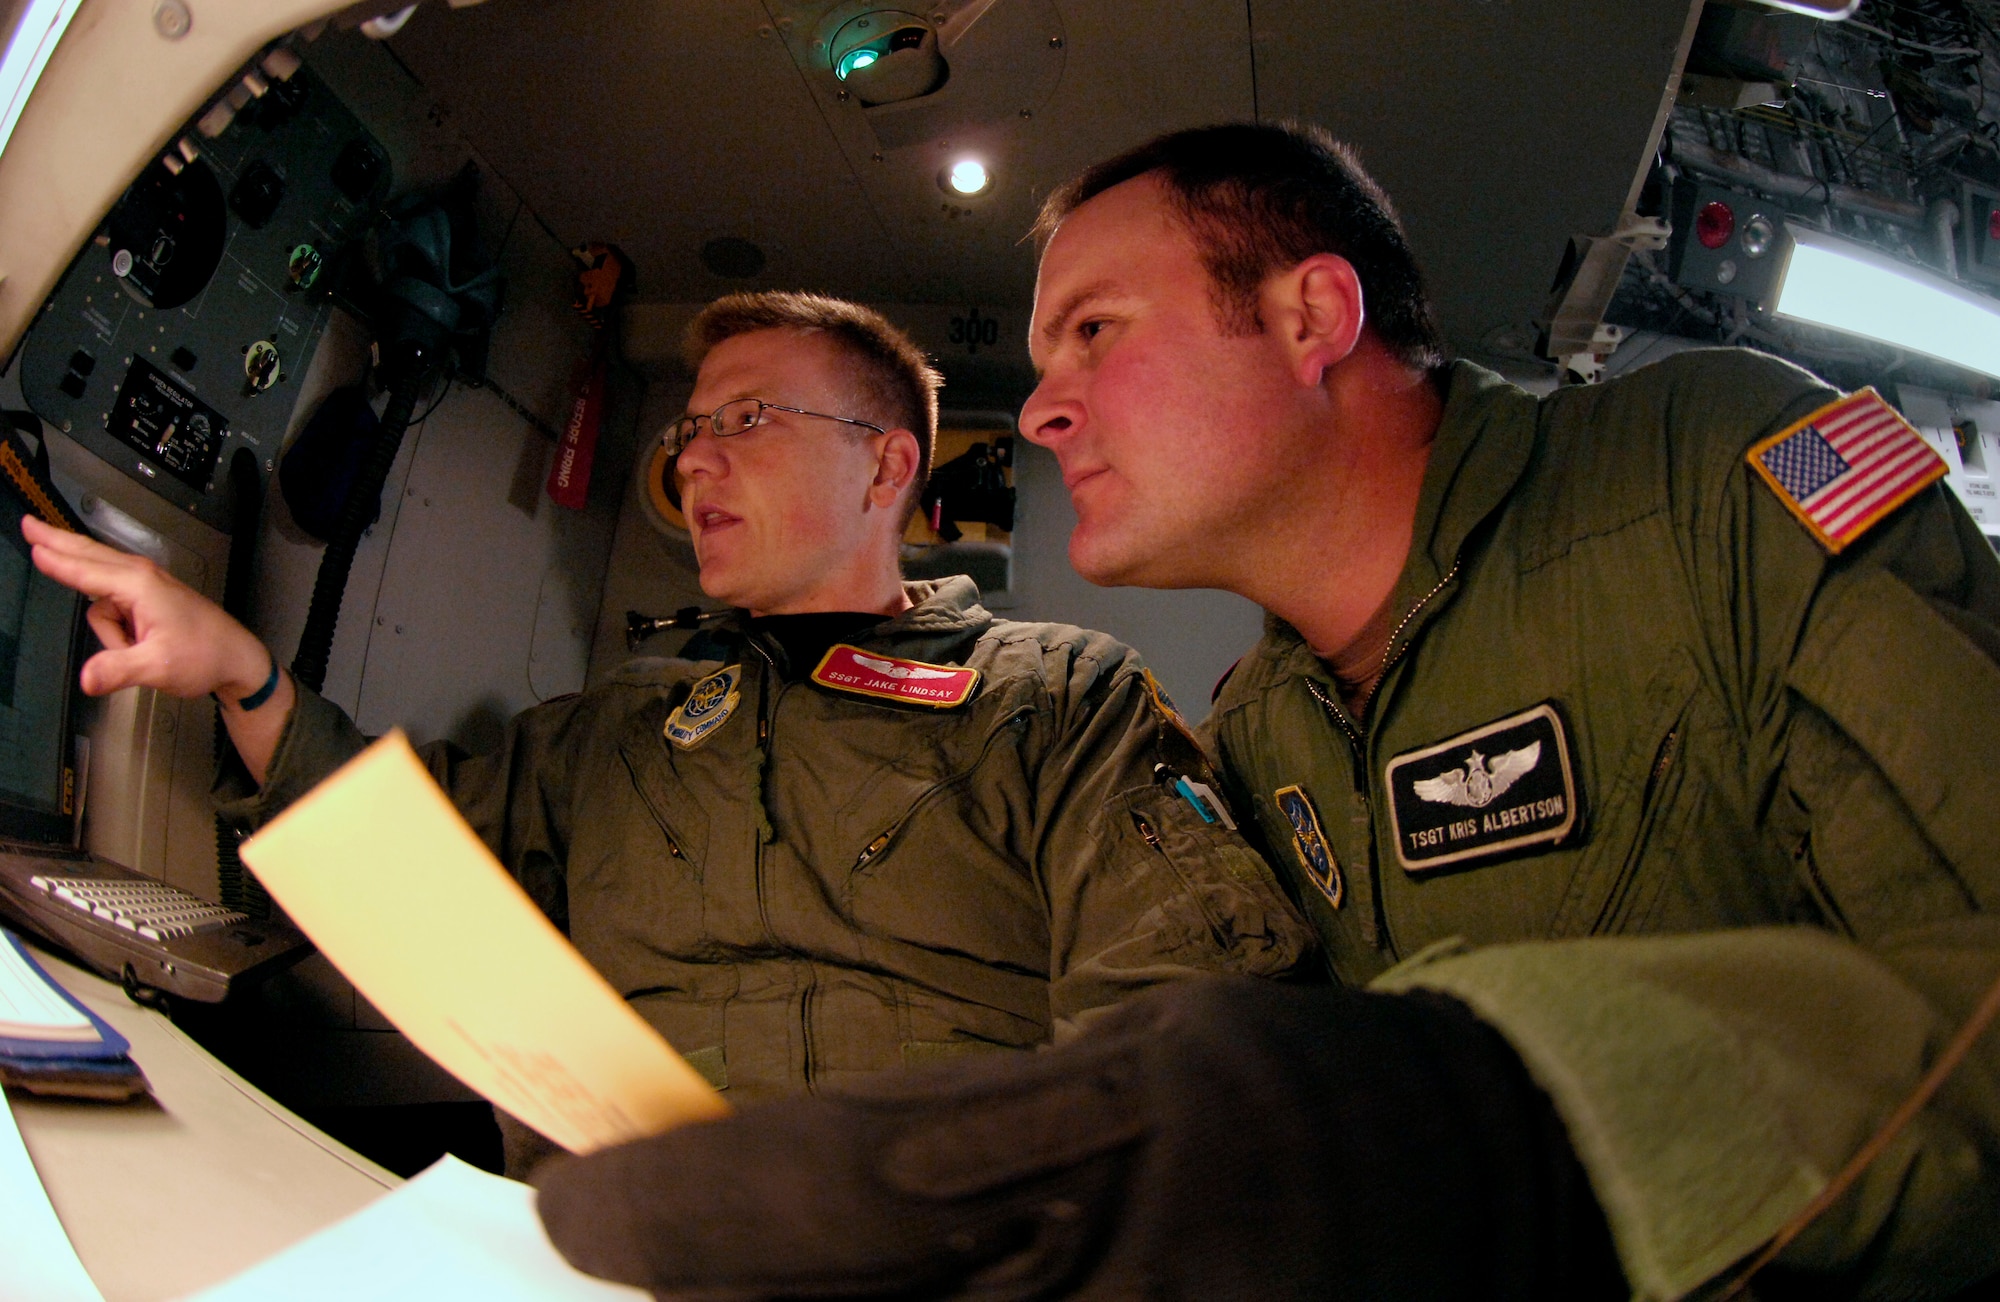 Staff Sgt. Jake Lindsay and Kris Albertson go over their load plan on a C-17 Globemaster III Aug. 25, 2007 at Christchurch New Zealand during Operation Deep Freeze. A C-17 and 31 Airmen from McChord Air Force Base, Wash. are conducting the annual winter fly-in augmentation of scientist, support personnel, food and equipment for the U.S. Antarctic Program at McMurdo Station, Antarctica. WinFly is the opening of the first flights to McMurdo station, which closed for the austral winter in Feb. (U.S. Air Force photo/Tech. Sgt. Shane A. Cuomo